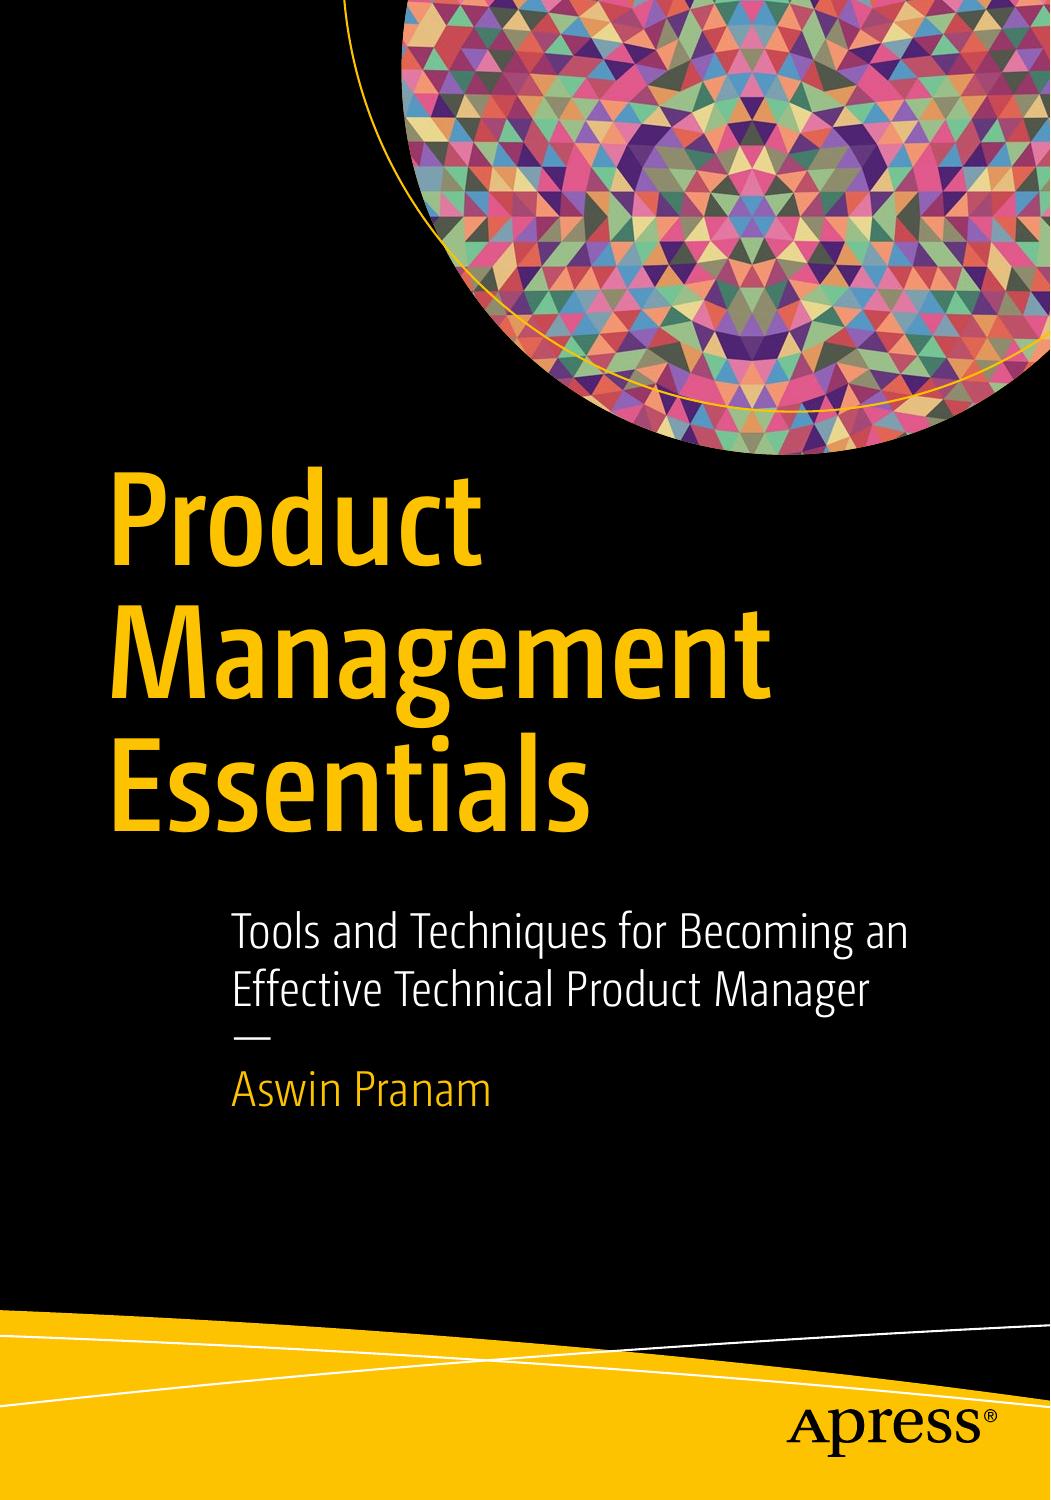 Product Management Essentials  Tools and Techniques for Becoming an Effective Technical Product Manager 2018